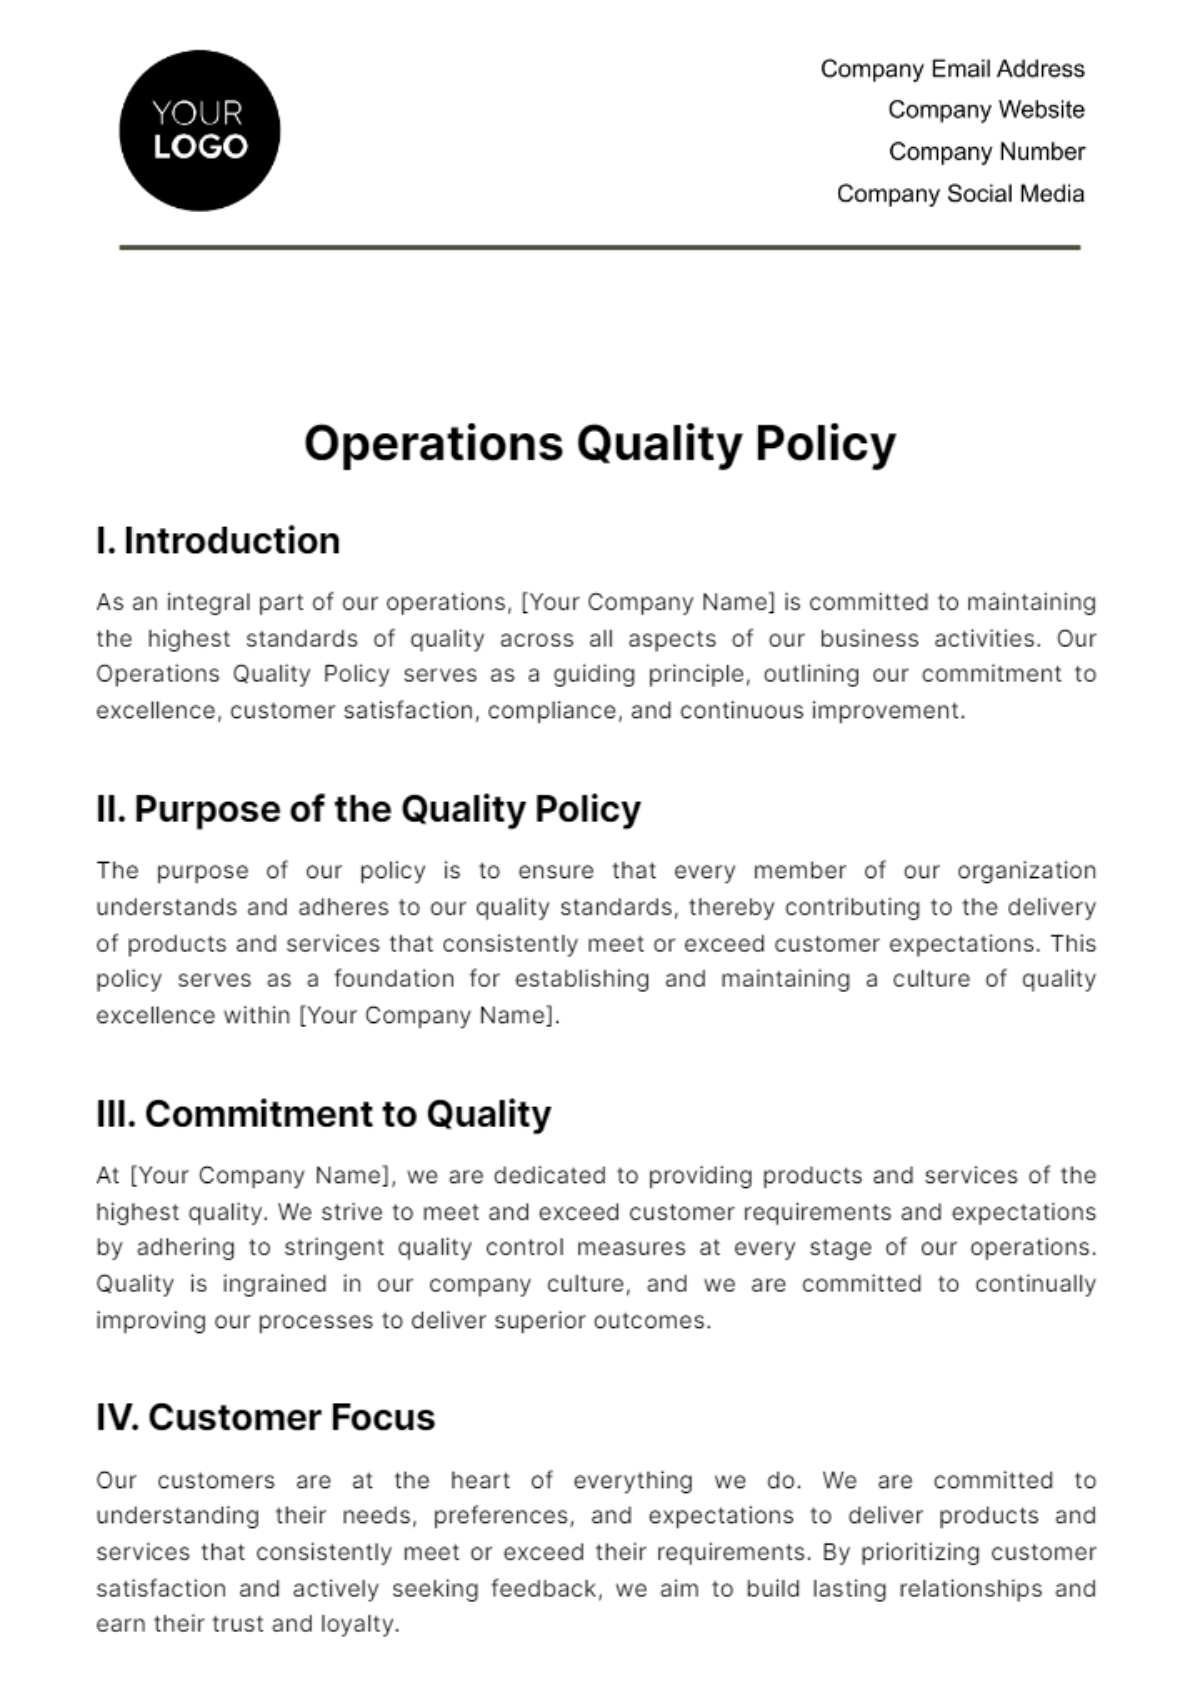 Operations Quality Policy Template